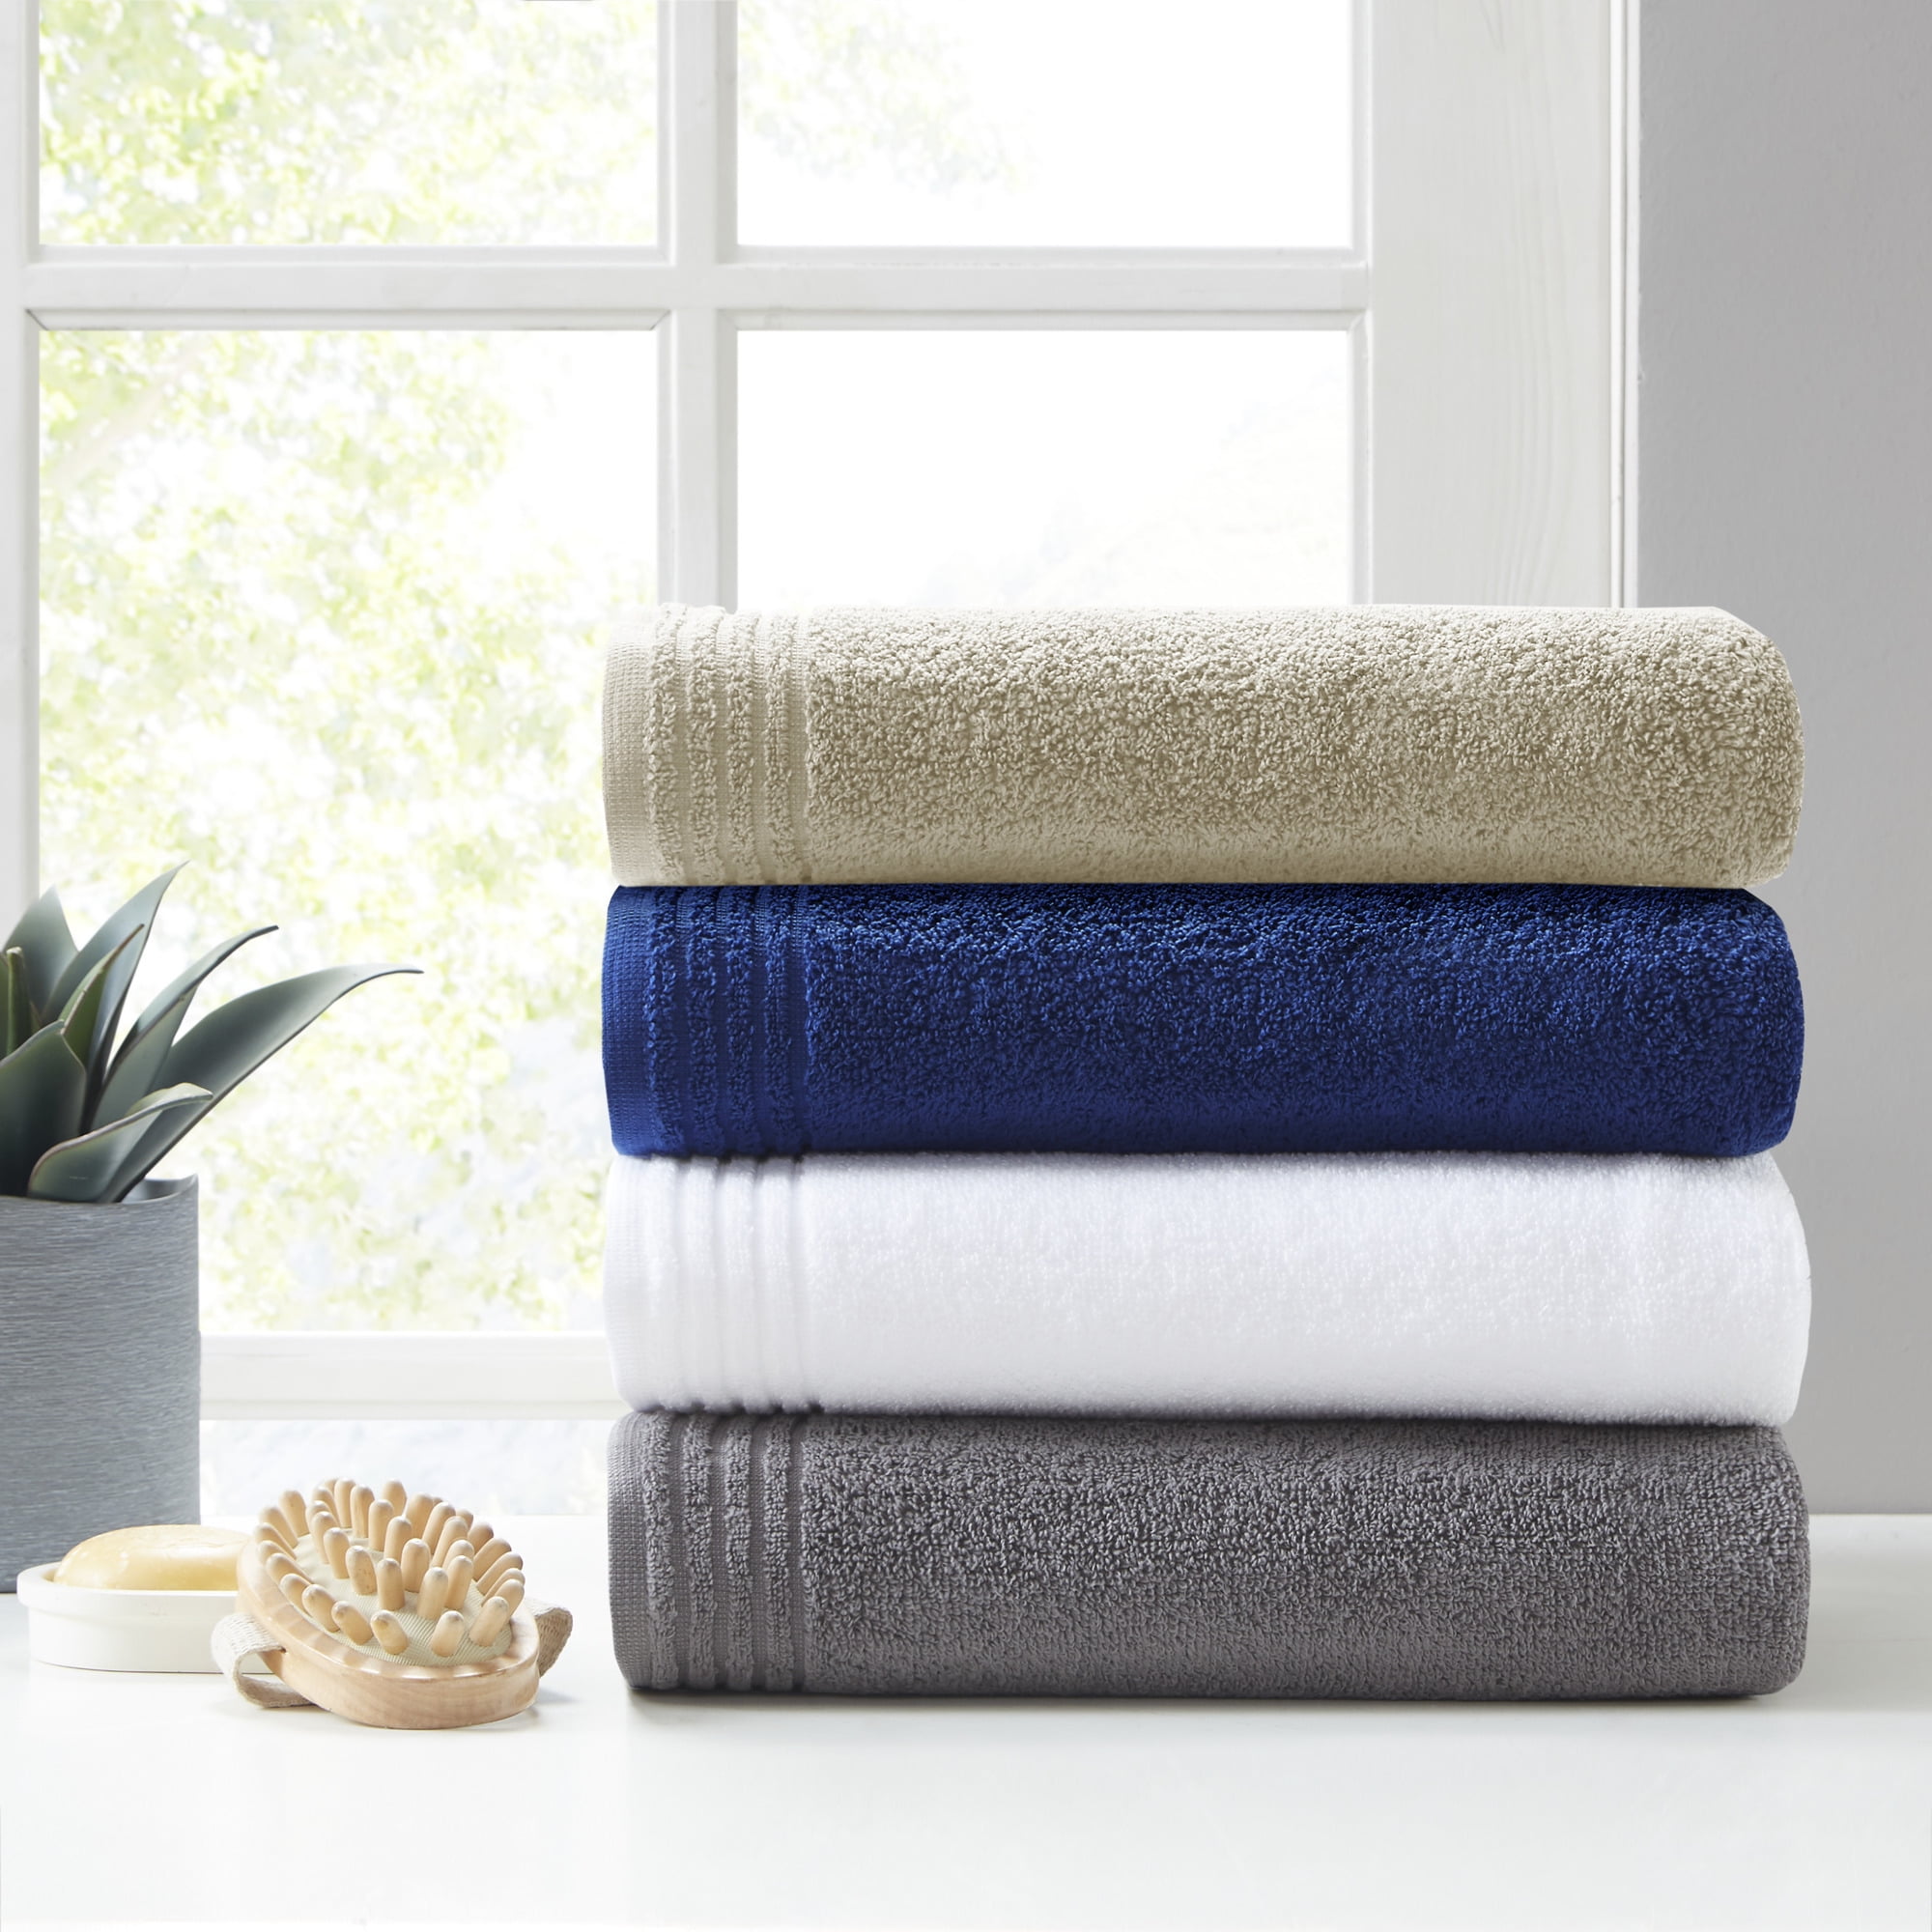  The Big One Solid Cotton Bath Towel, Dove : Home & Kitchen